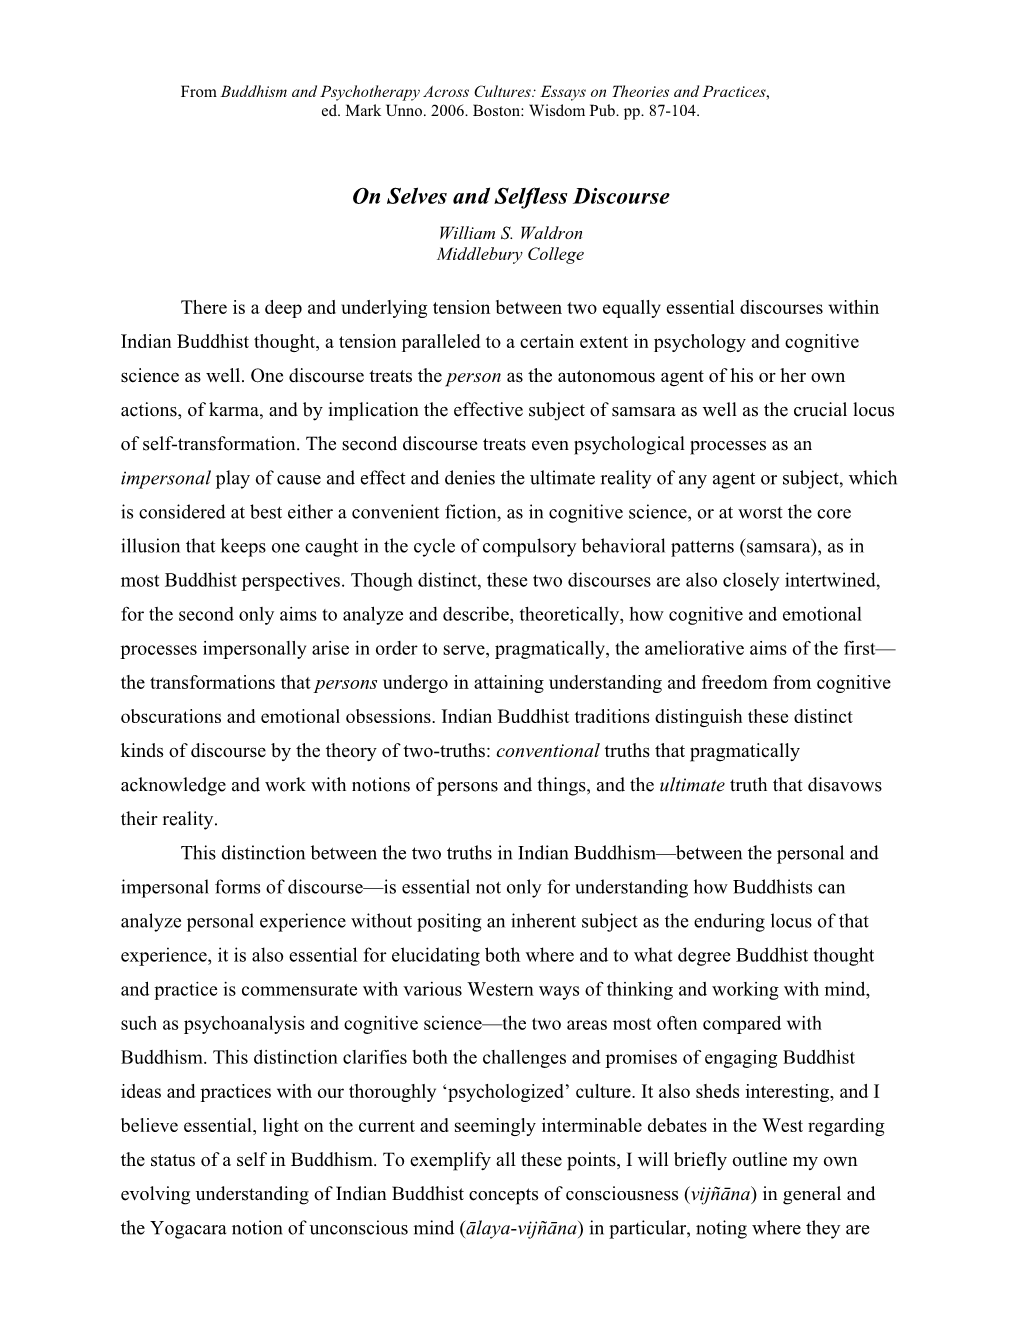 On Selves and Selfless Discourse William S